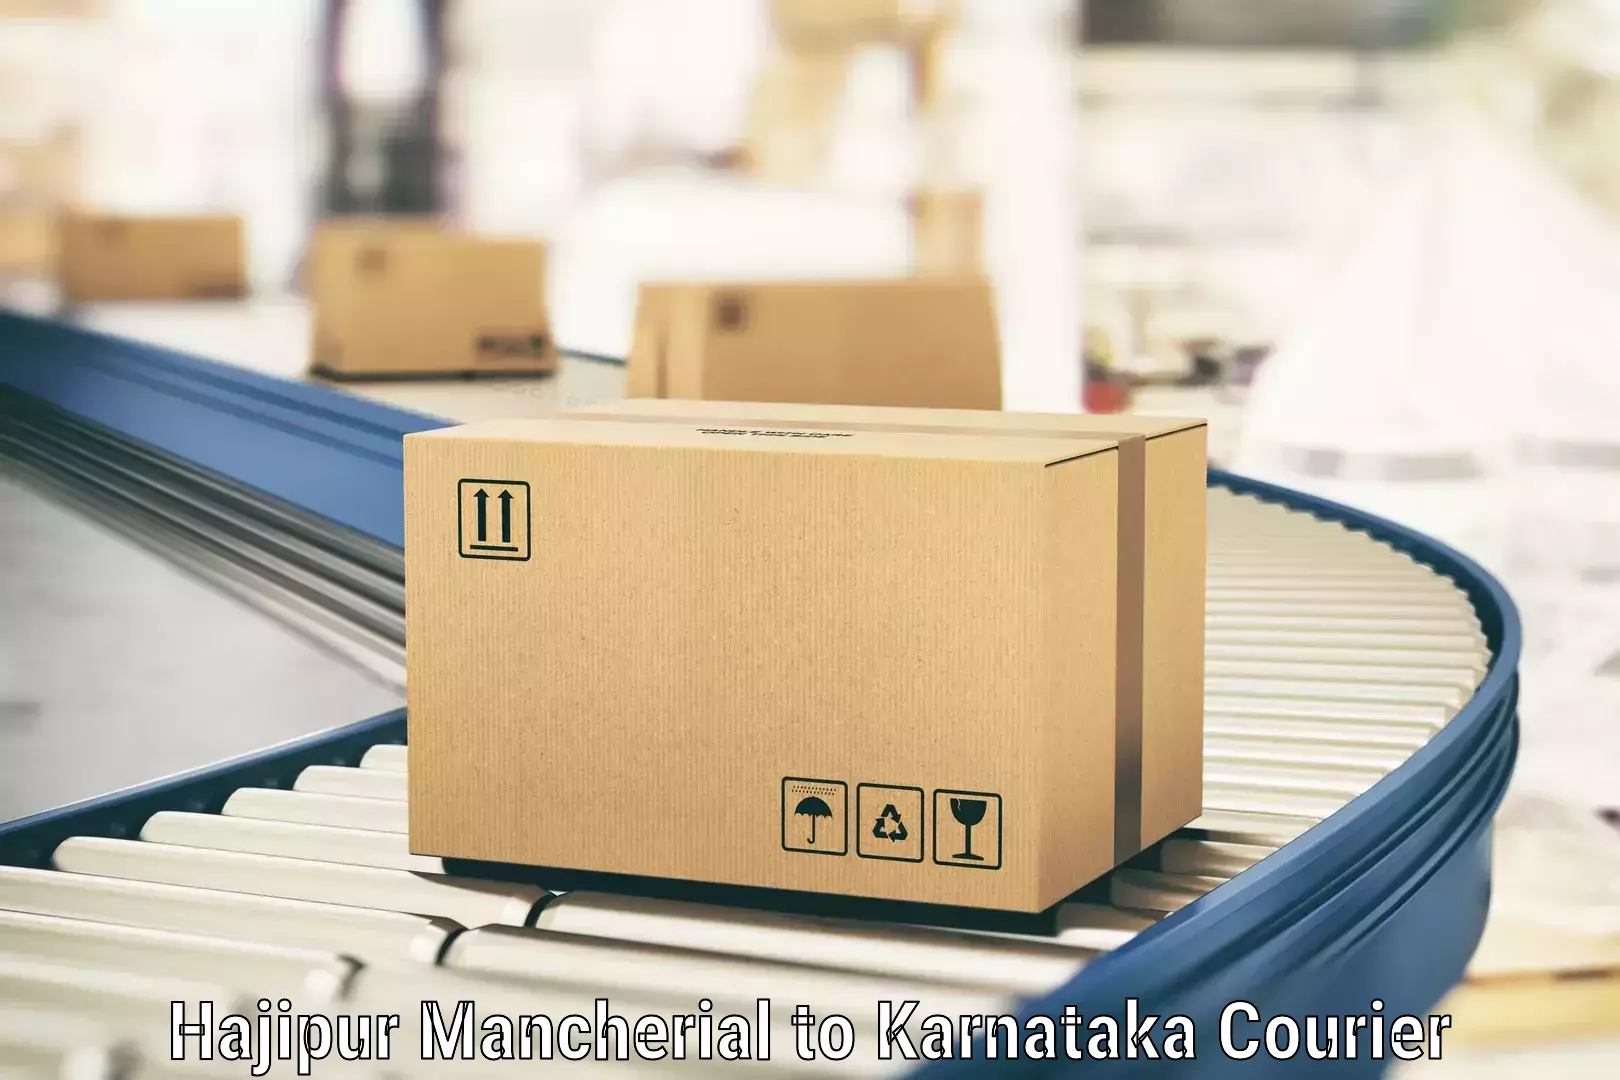 Automated shipping processes Hajipur Mancherial to Channapatna